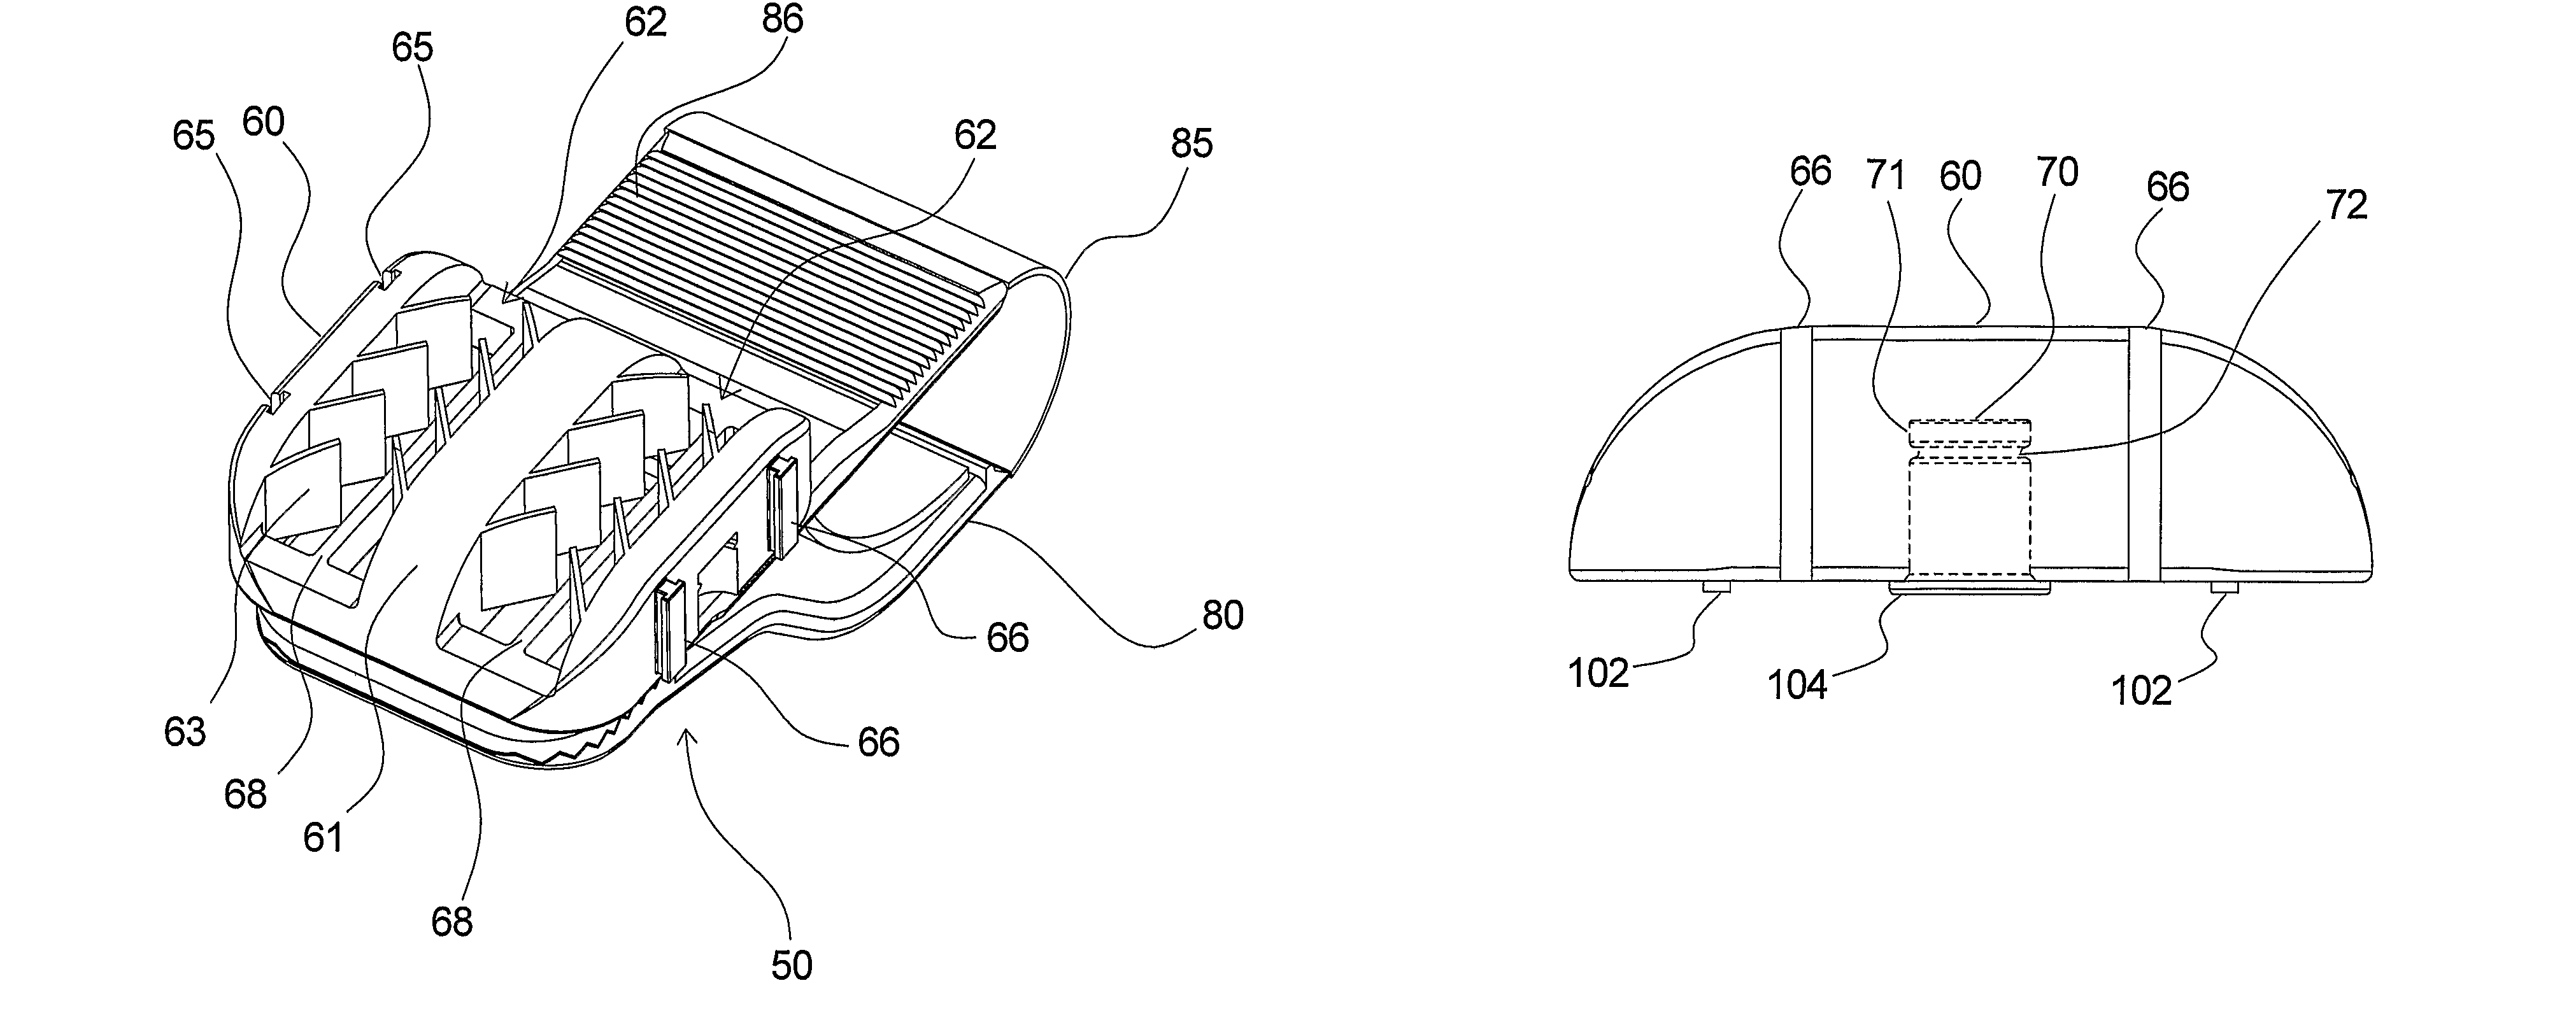 Medical securing device